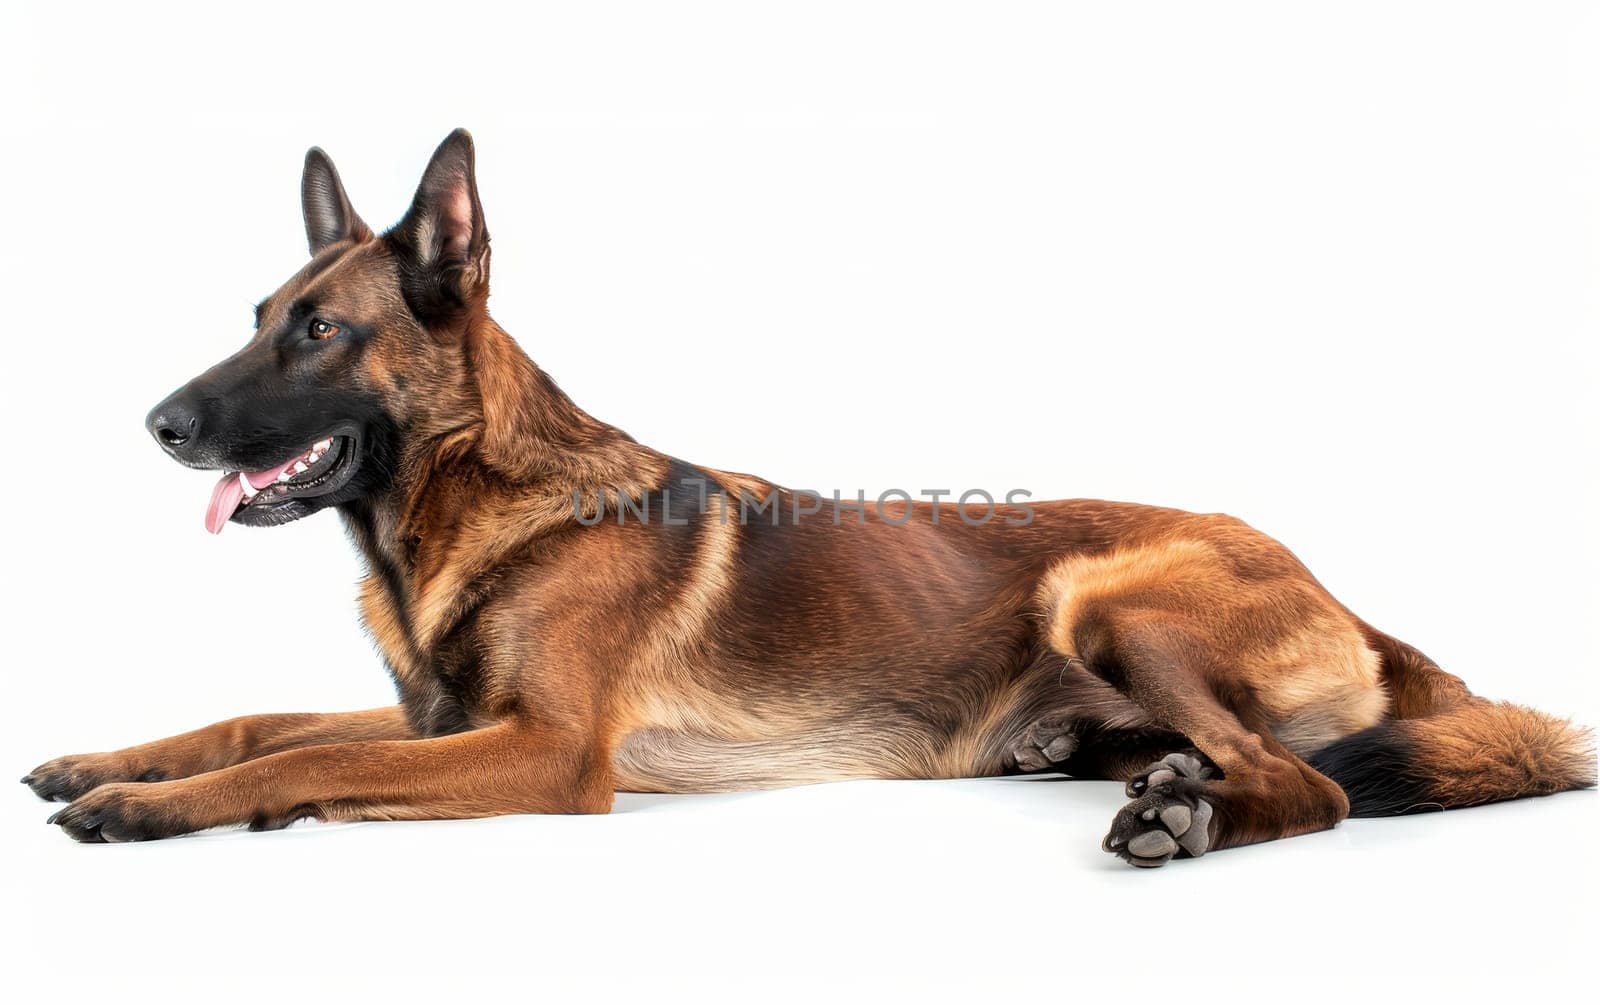 A Belgian Malinois dog lies down gracefully on a white background, its gaze fixed off-camera, embodying both the breed's elegance and attentiveness.